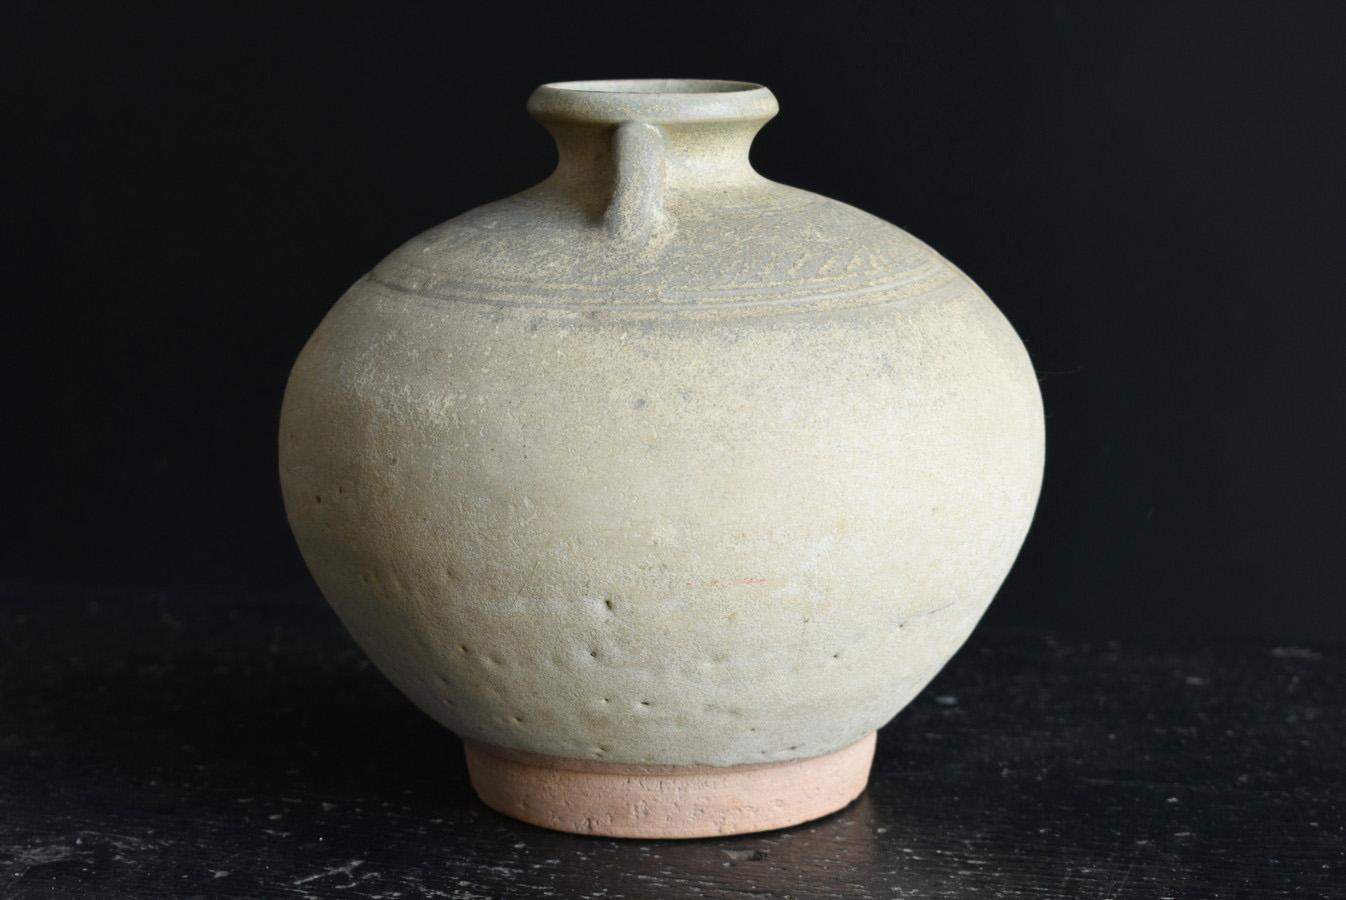 Glazed Thai antique pottery jar/15th to 16th century/excavated pottery